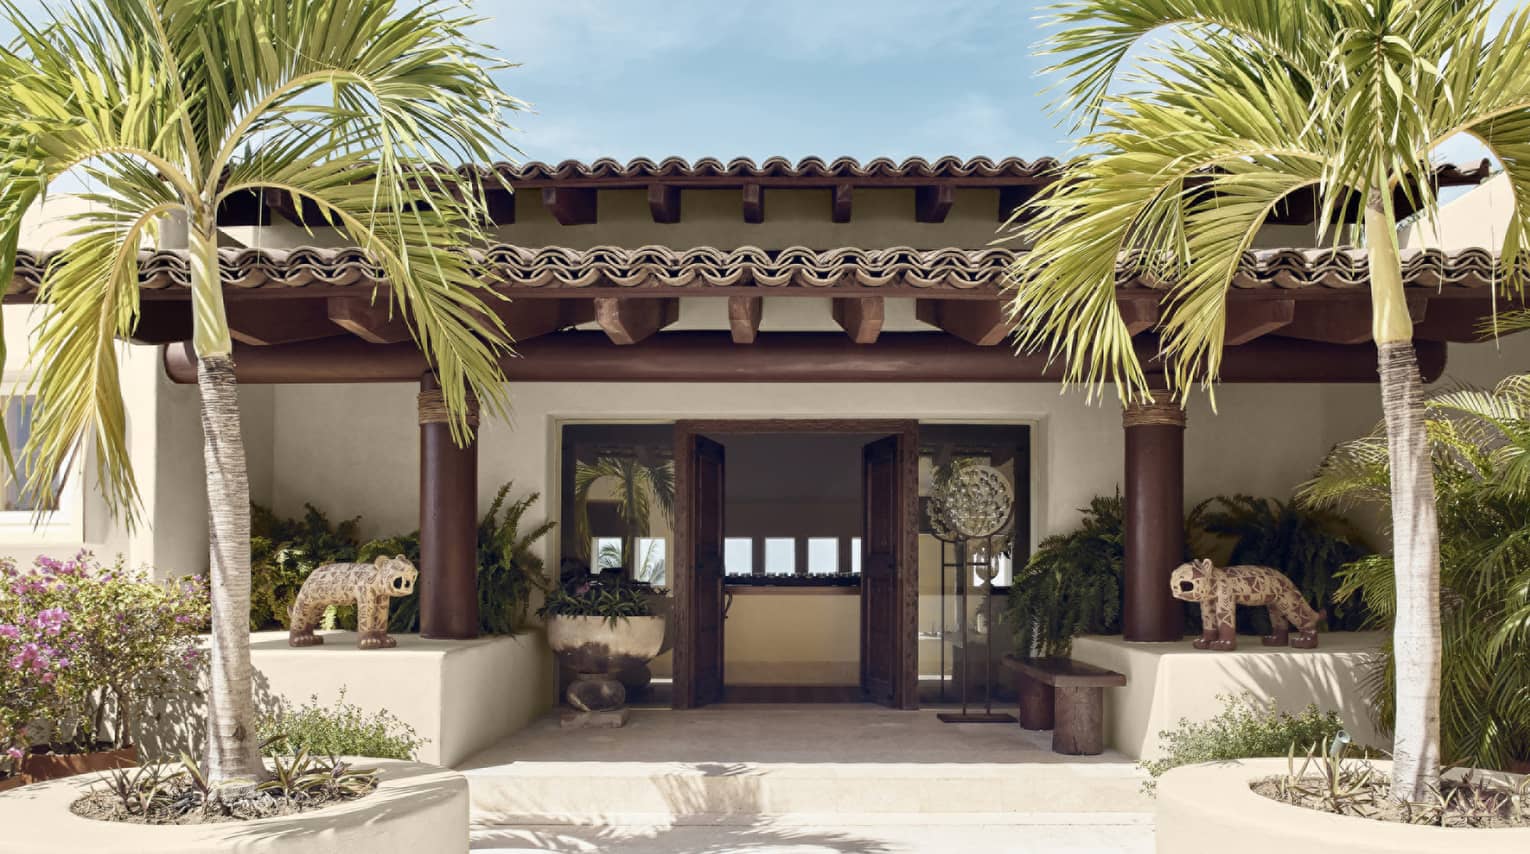 Entrance to private villa with palm trees